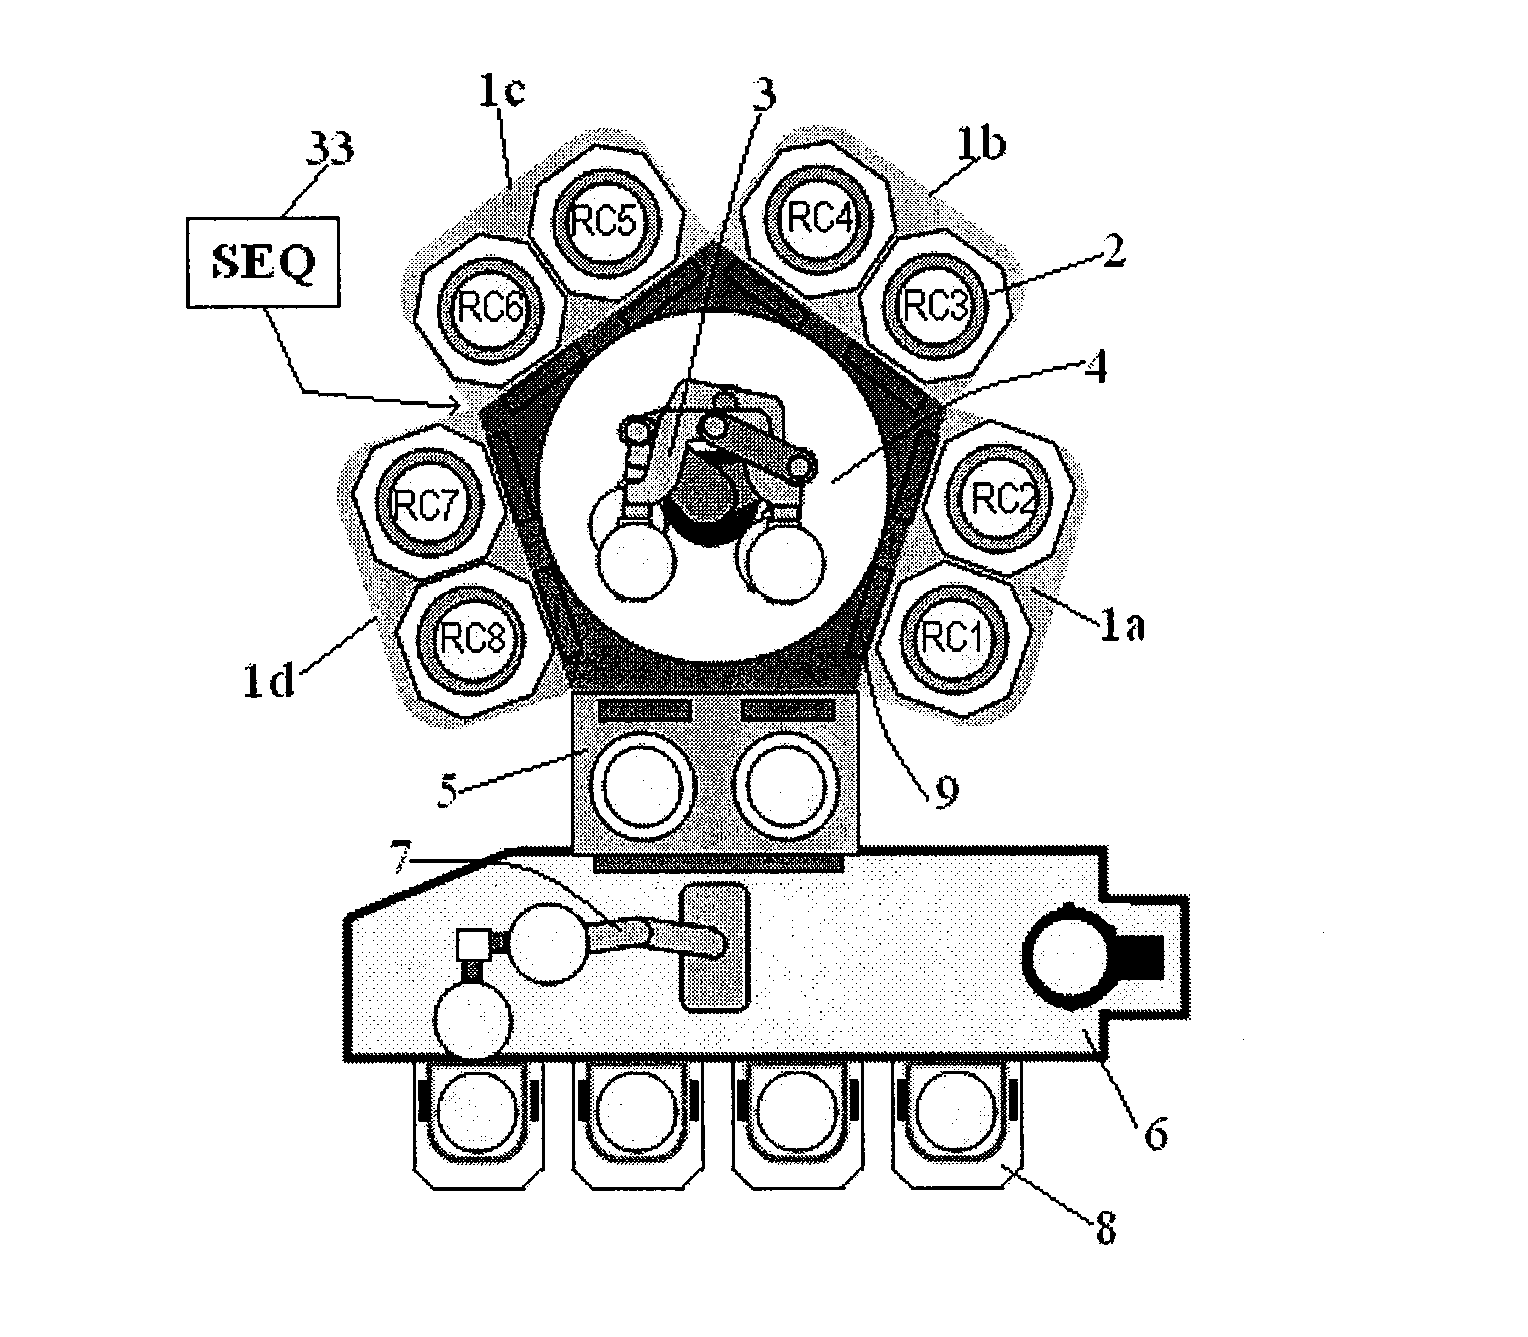 High-throughput semiconductor-processing apparatus equipped with multiple dual-chamber modules